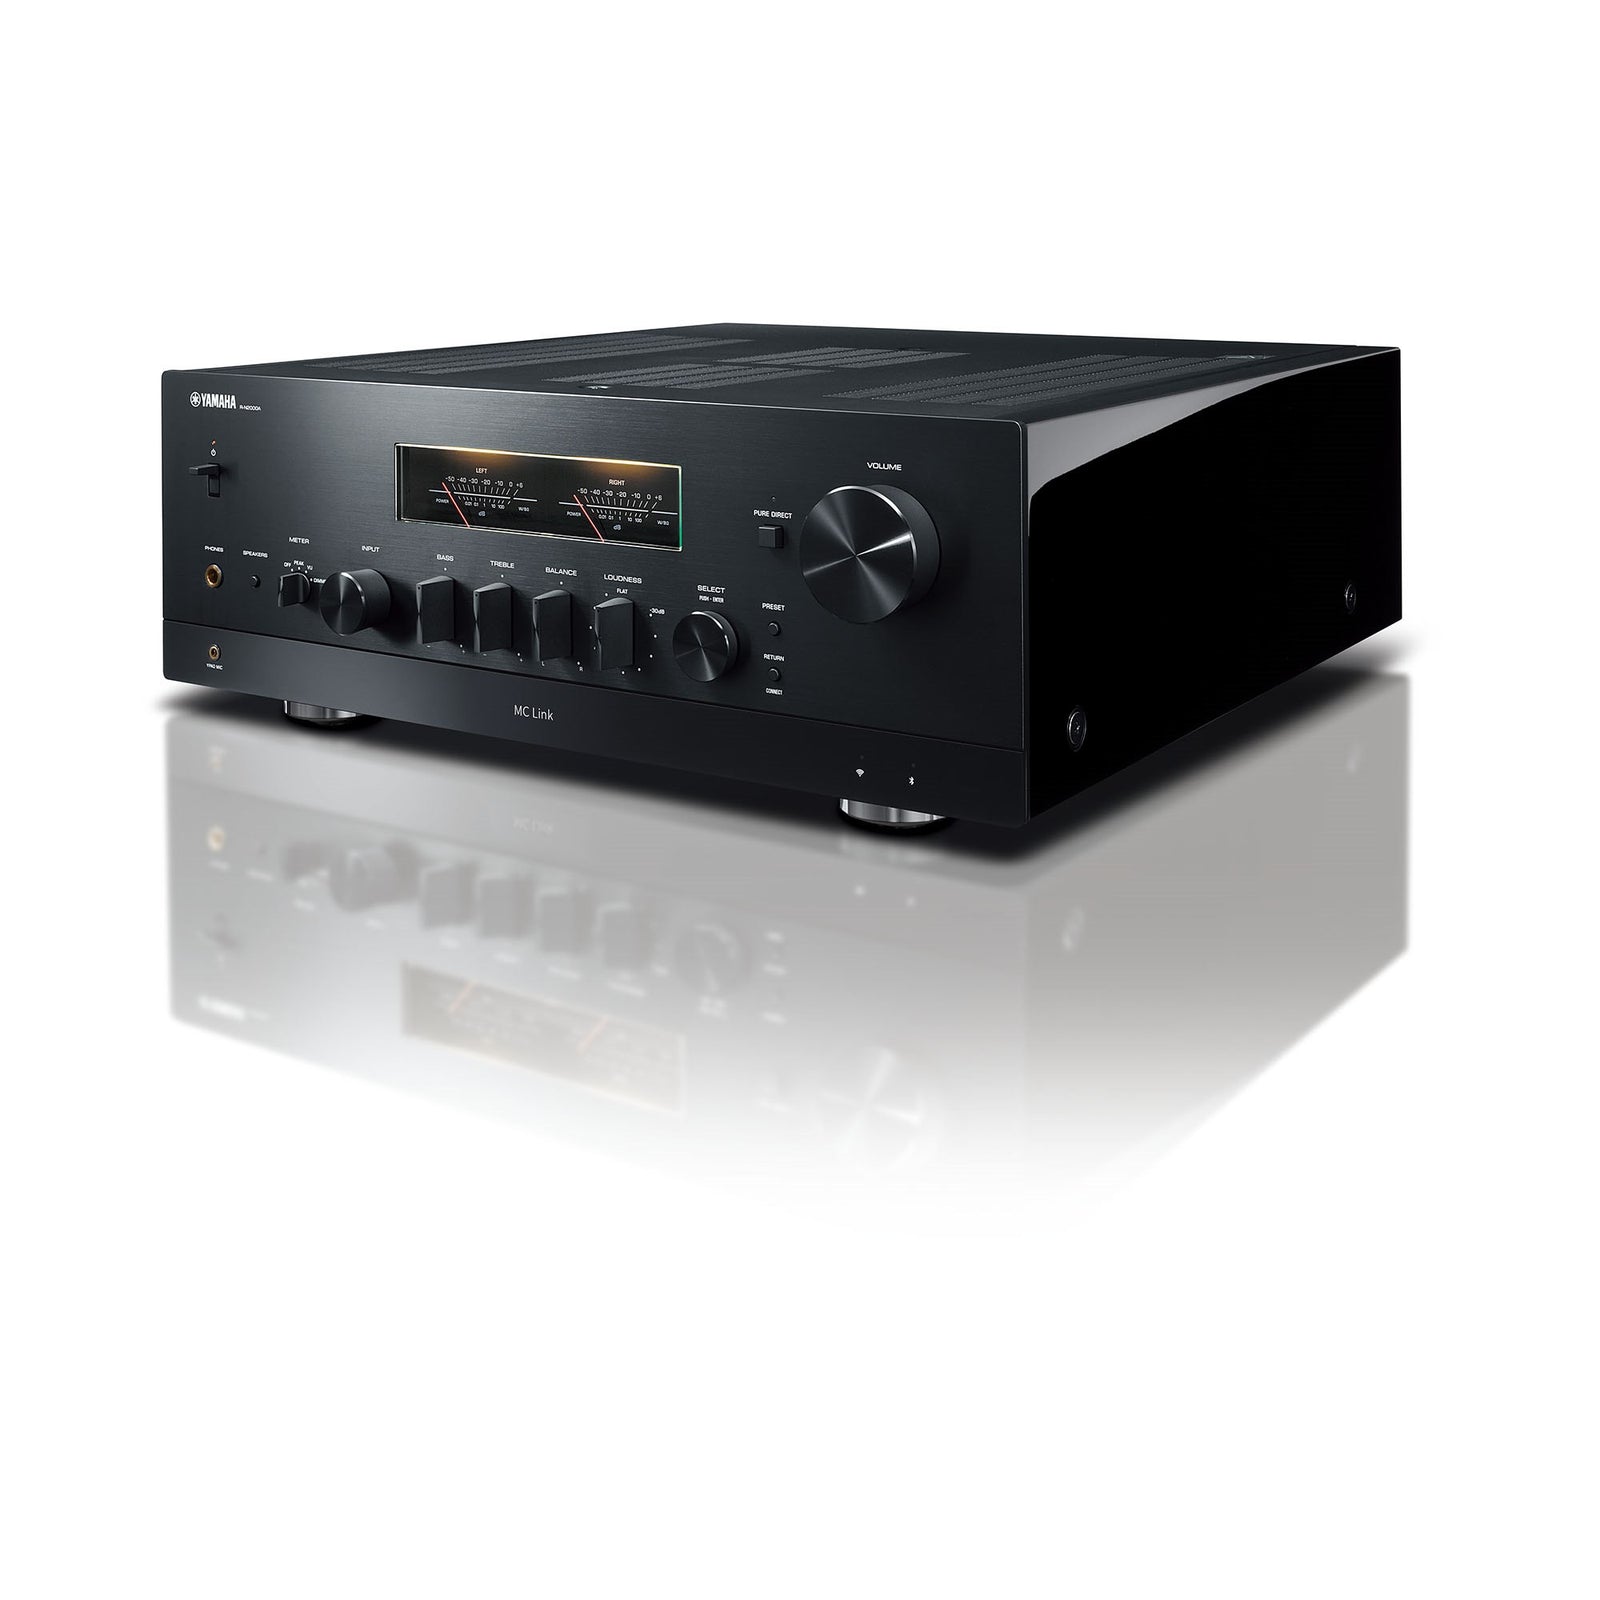 YAMAHA R-N2000A - 2CH RECEIVERS | VINYL SOUND Yamaha R-N2000A - 2ch Receivers with its authentic Hi-Fi quality, the Yamaha R-N2000A is a next-generation Network HiFi Receiver, compatible with lossless and high-resolution music sources, including streaming services. It offers effortless ideal room acoustic adjustment (YPAO™) YPAO™-R.S.C.